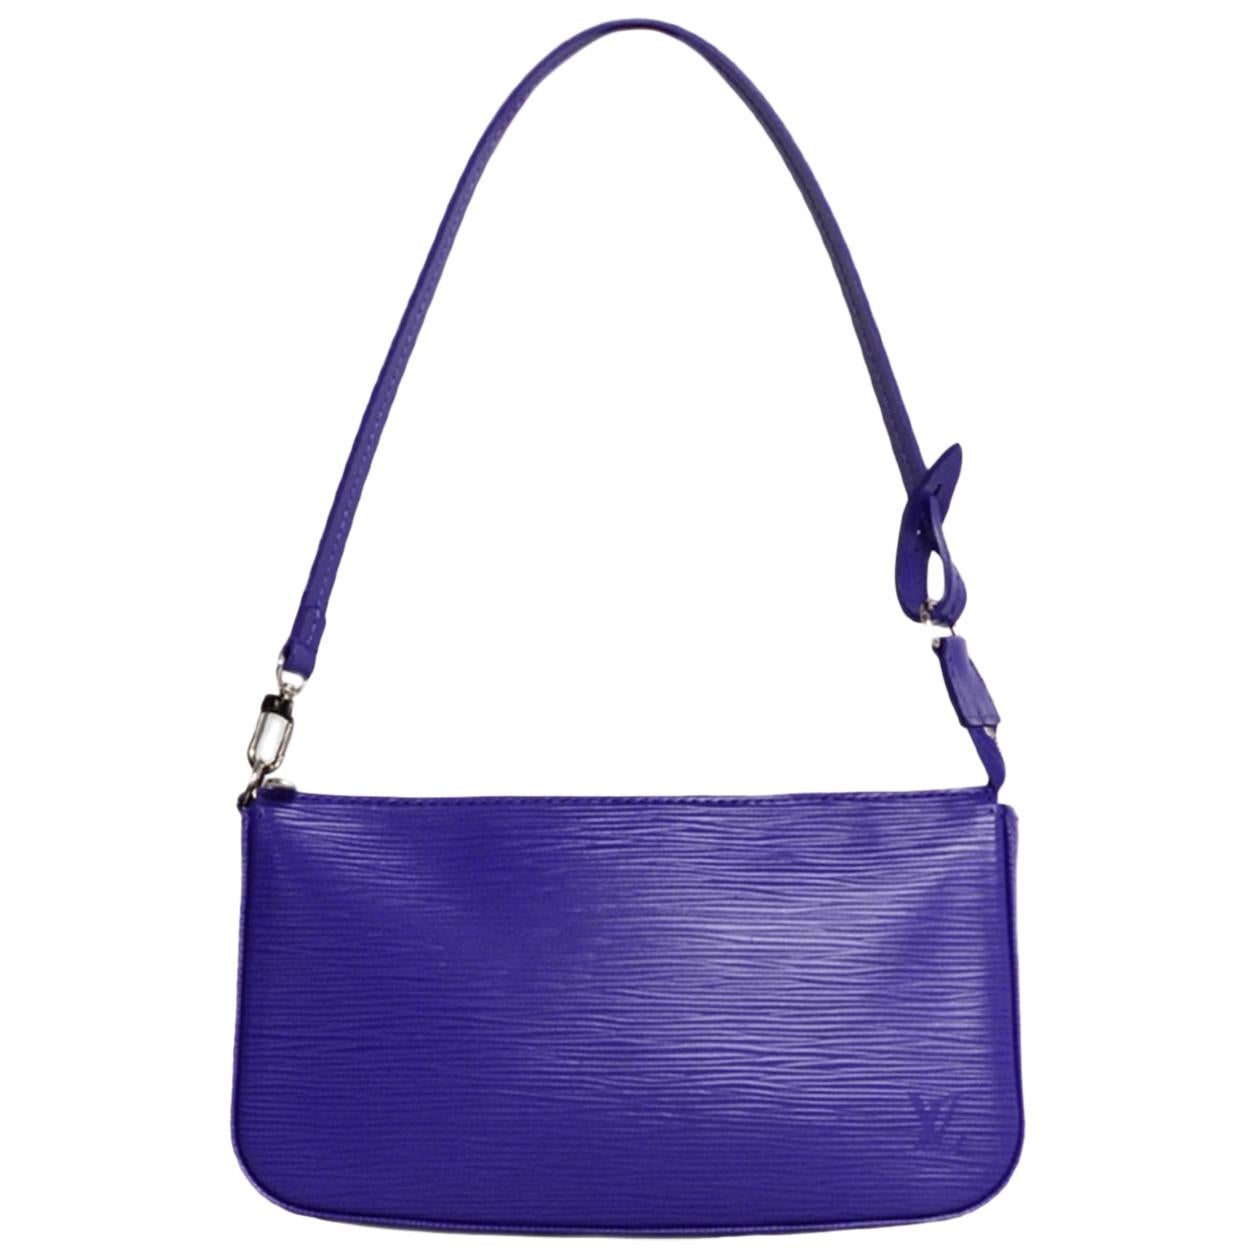 Louis Vuitton MM top handle bag in purple epi leather - DOWNTOWN